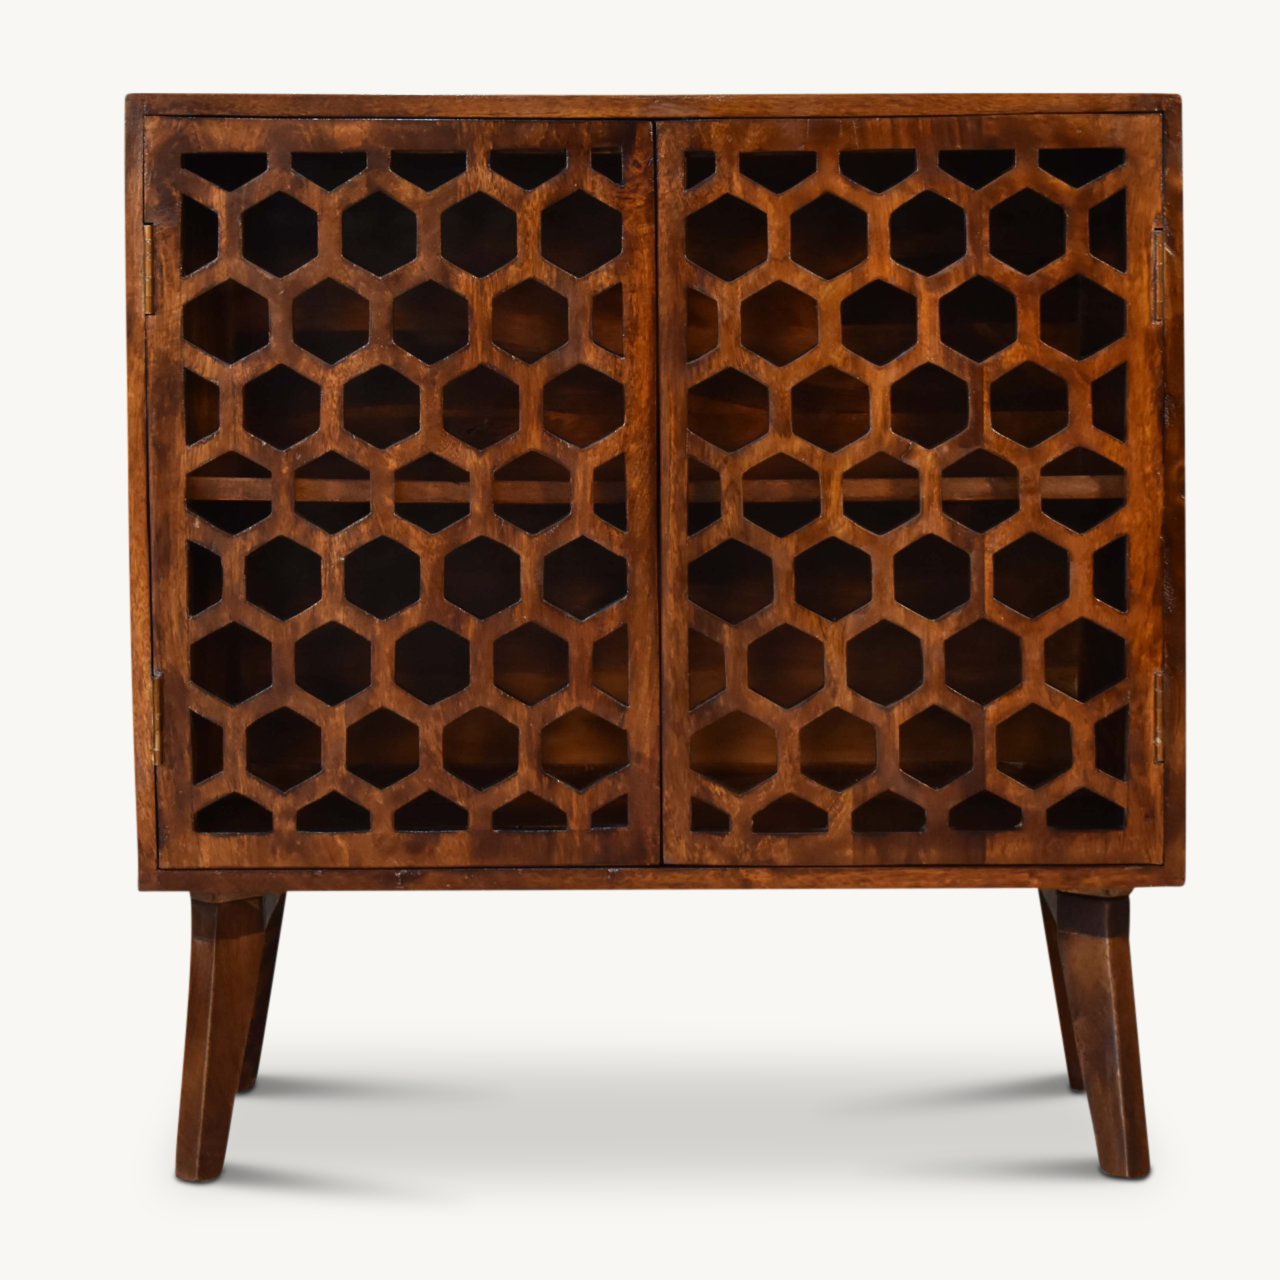 Solid wood cabinet with carved honeycomb patterned doors